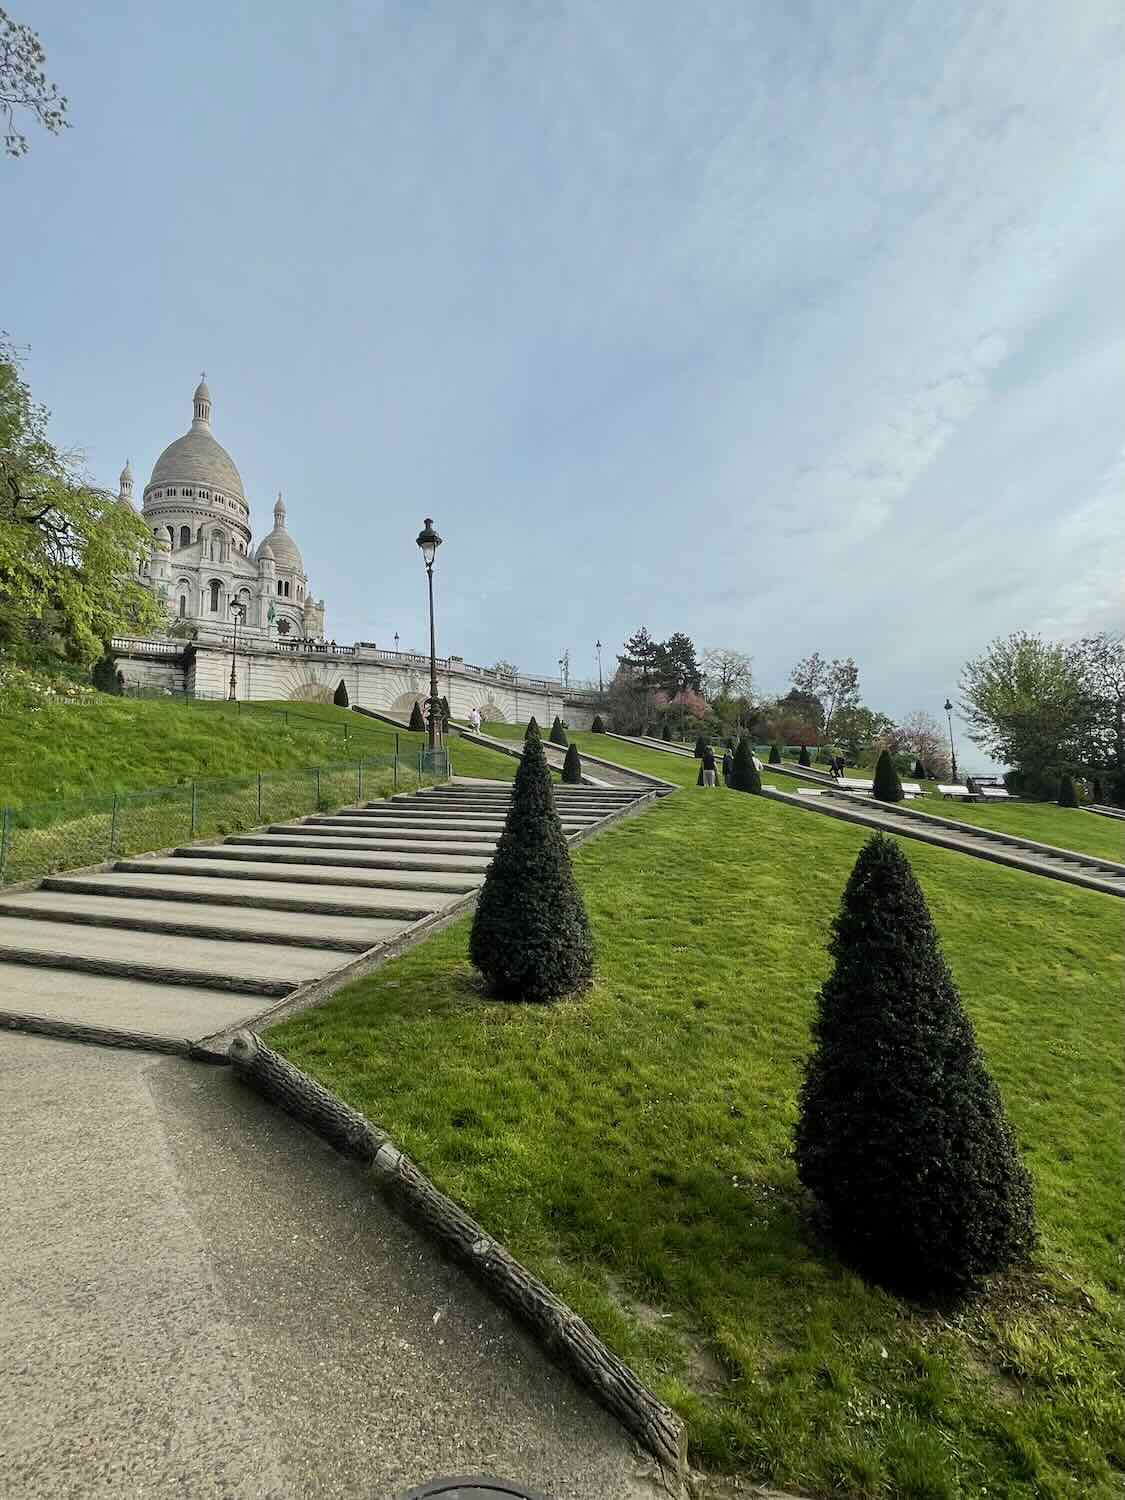 beautiful view of the Sacré-Cœur Basilica in Montmartre, Paris. It's seen from a lower perspective, looking up a set of stairs surrounded by lush green grass and lined with neat, cone-shaped shrubs, with the iconic white domes of the basilica standing out against a clear sky.